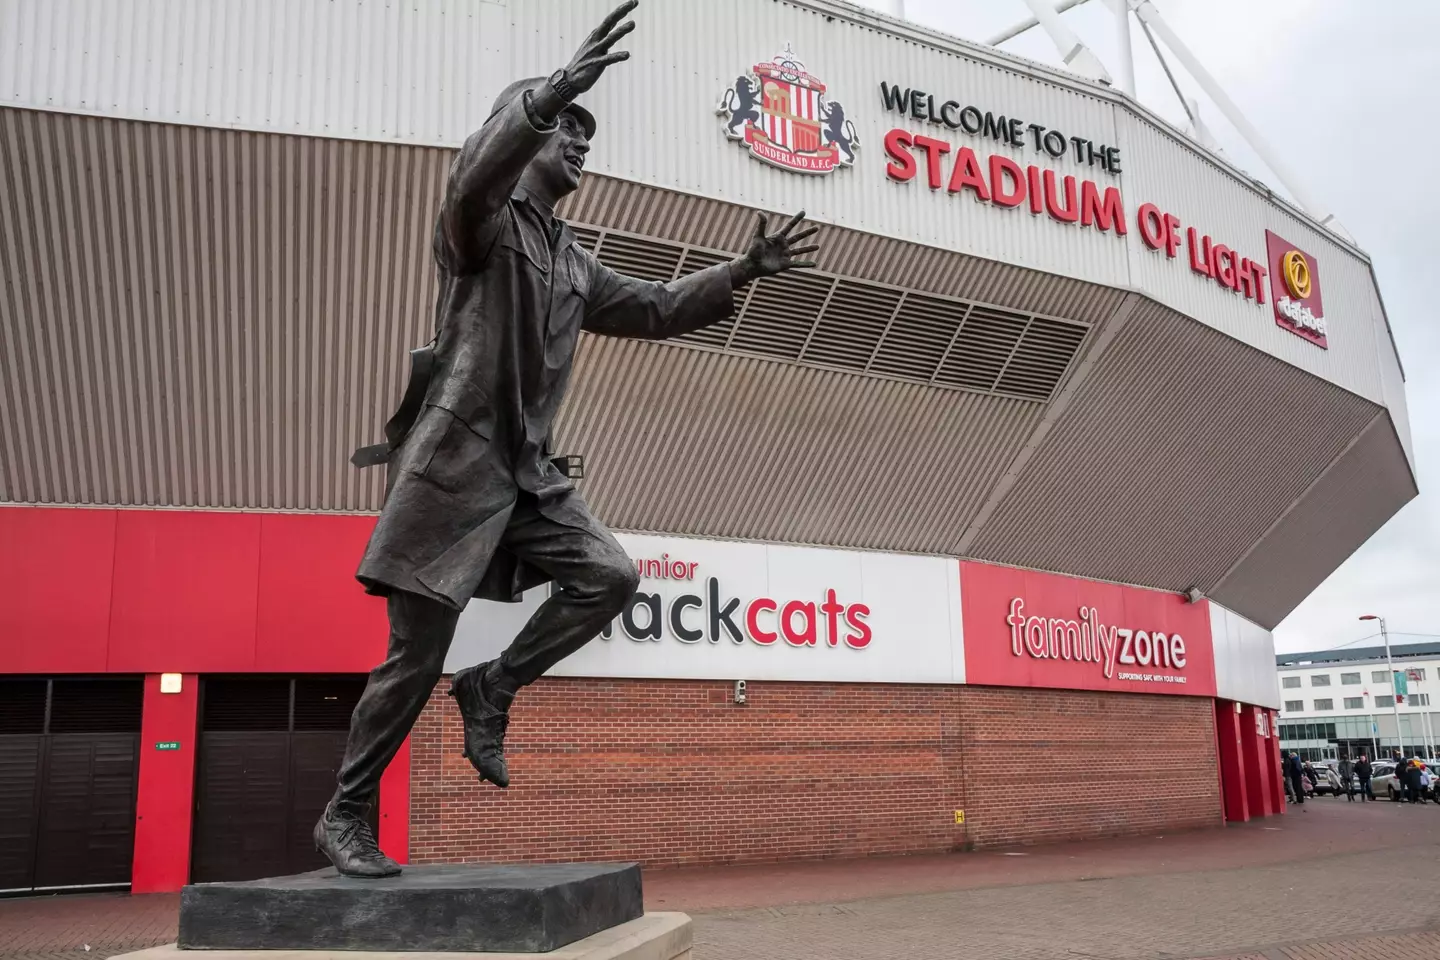 The statue shows Stokoe celebrating Sunderland's 1973 FA Cup triumph (Image: PA)